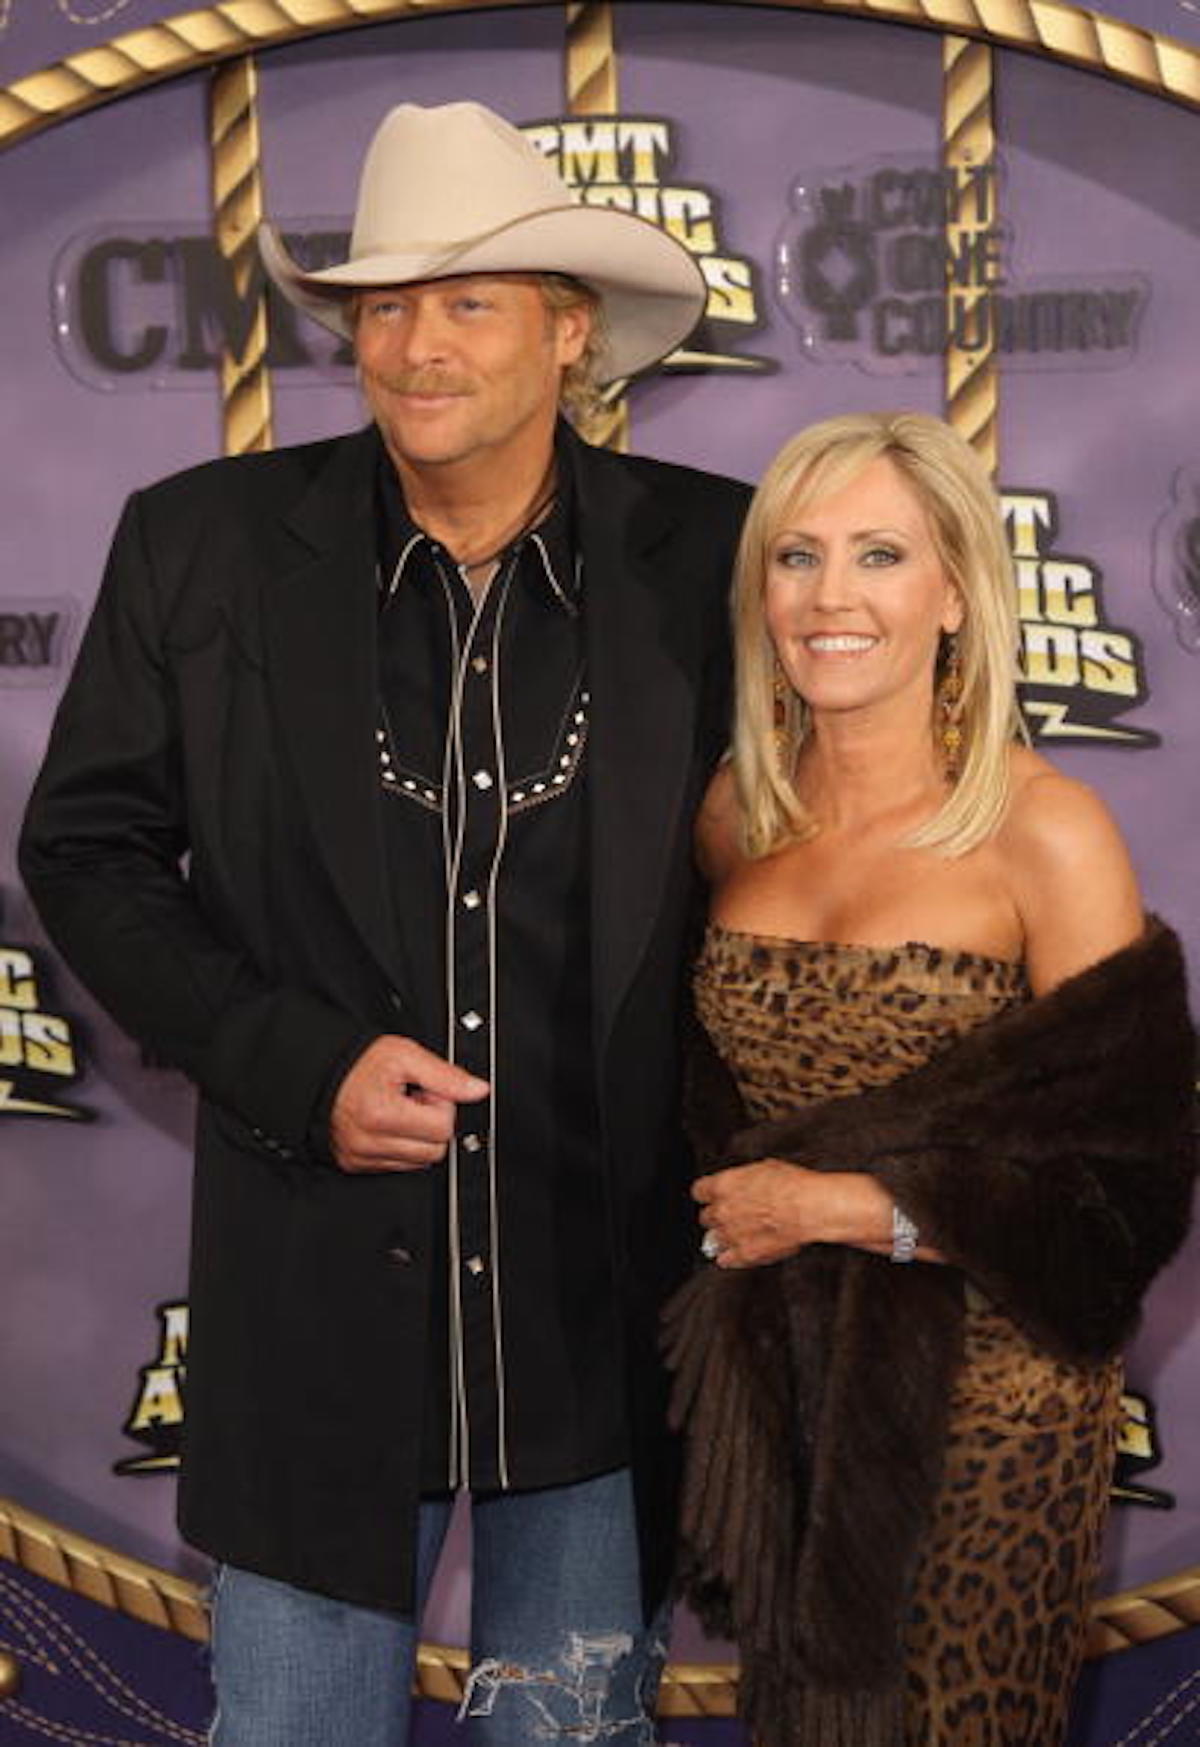 Inside Alan Jackson's 44-Year Love Story With His Wife, Denise